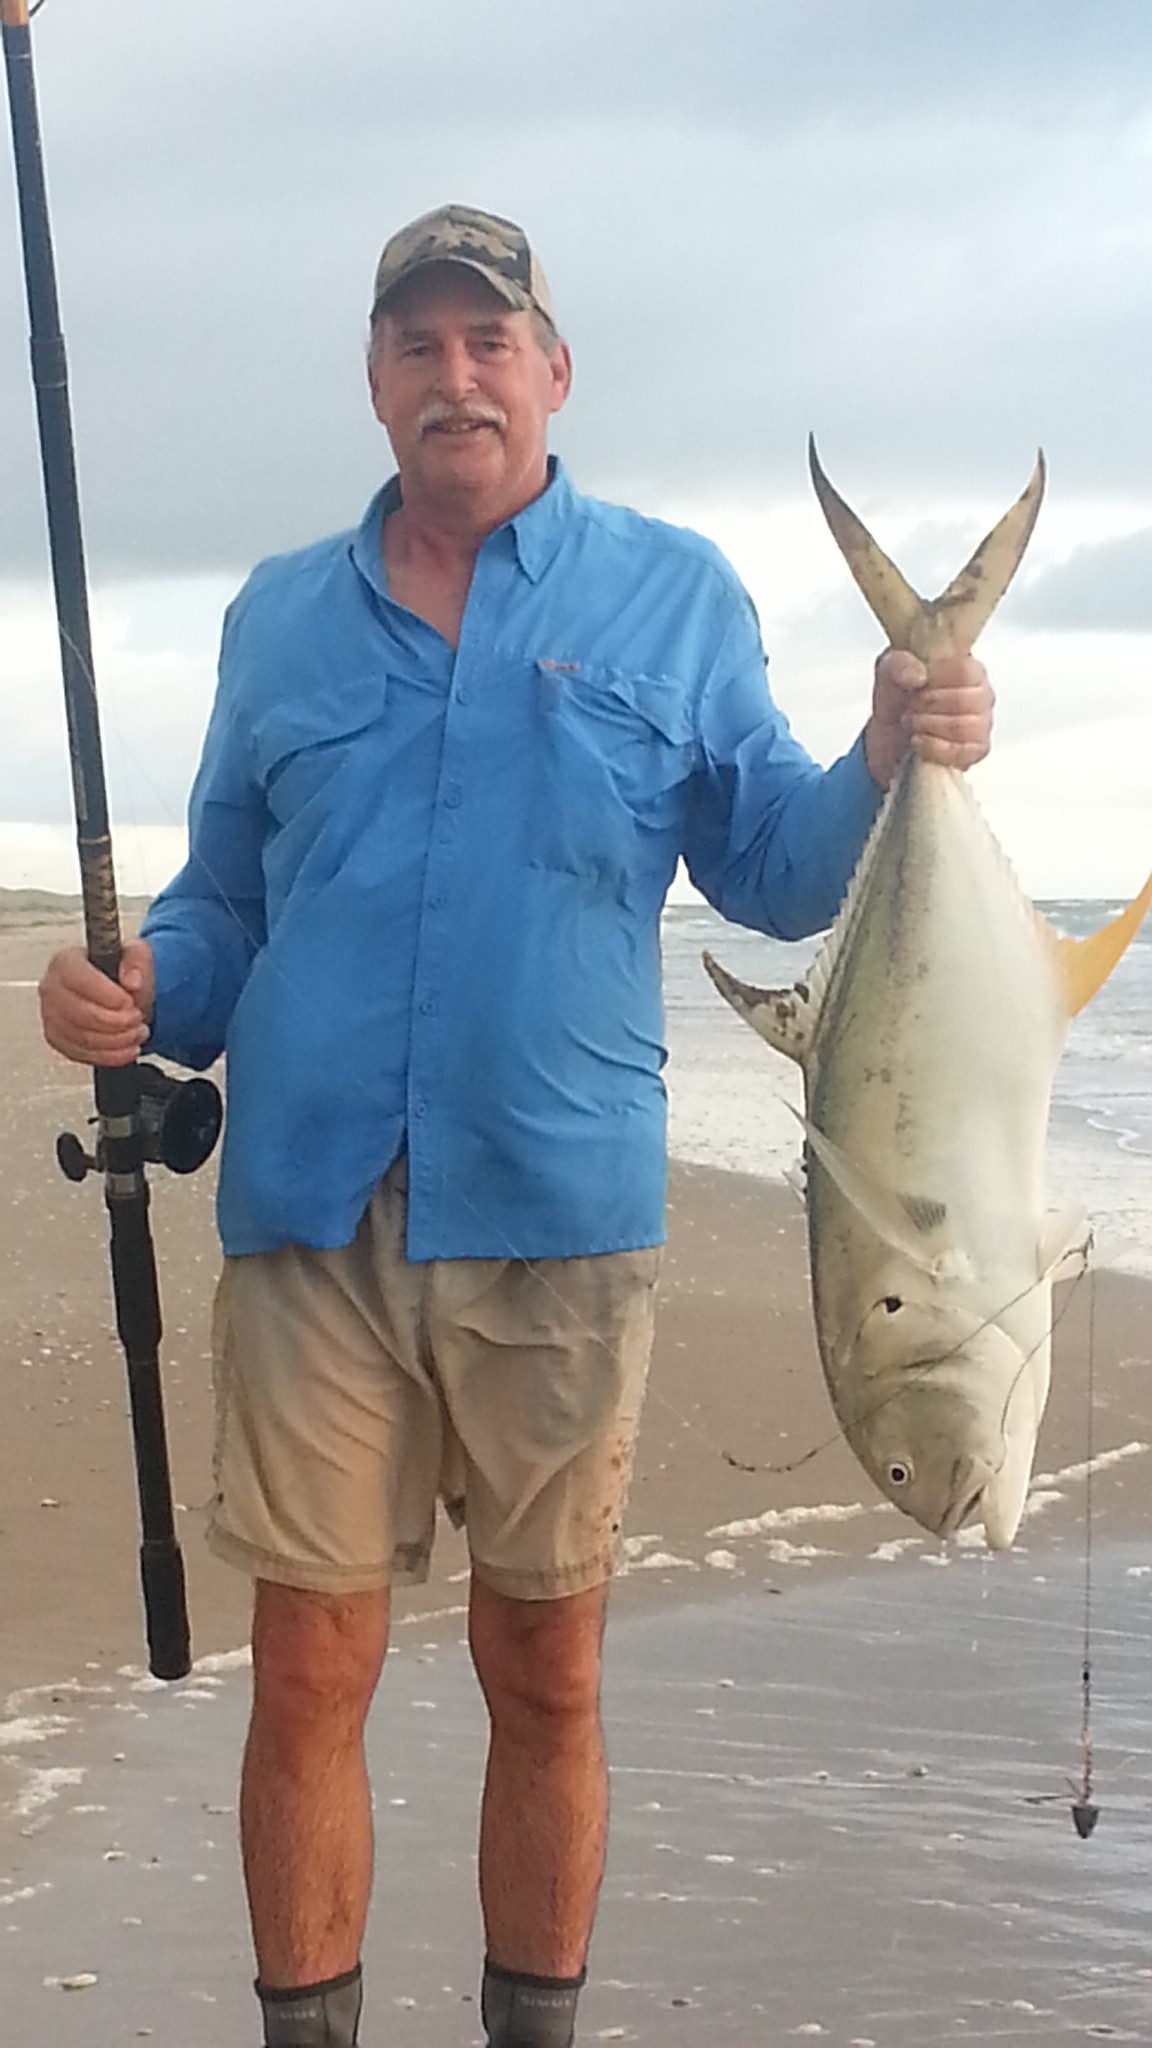 Ken Kuhn with a large Jack Crevalle caught in the surf